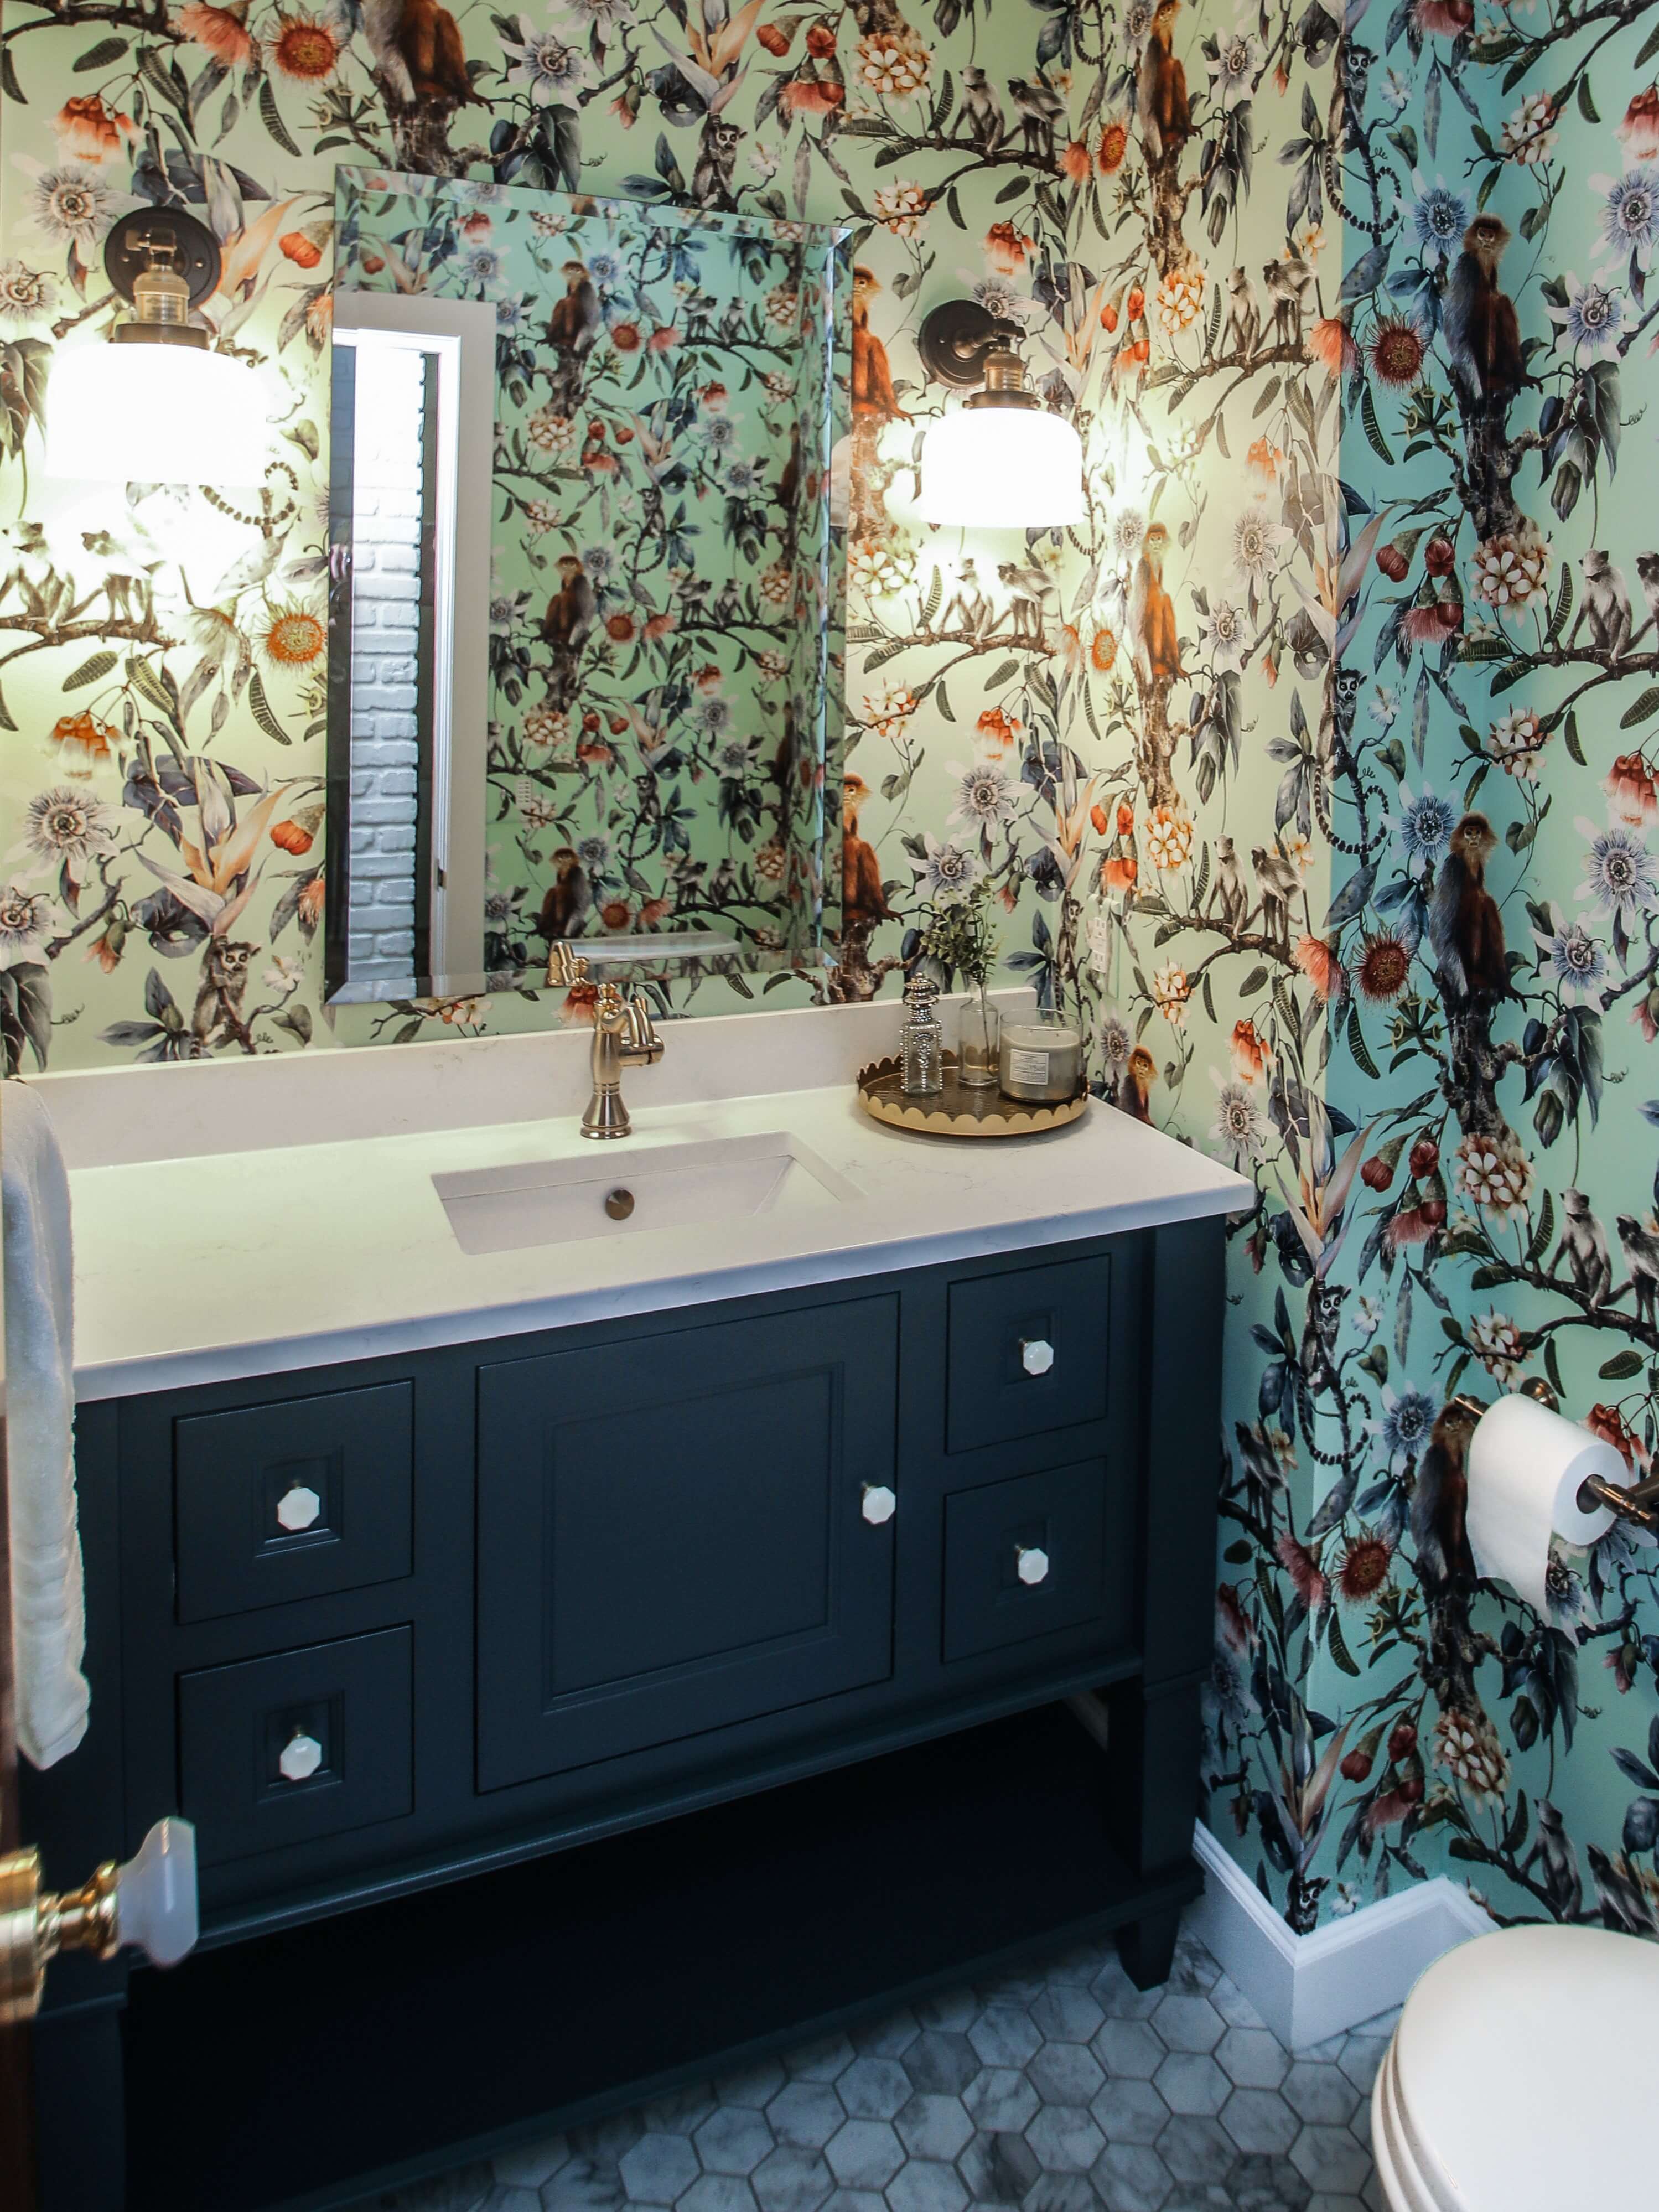 A dark navy blue furniture style vanity in a bathroom with extravagant wallpaper.